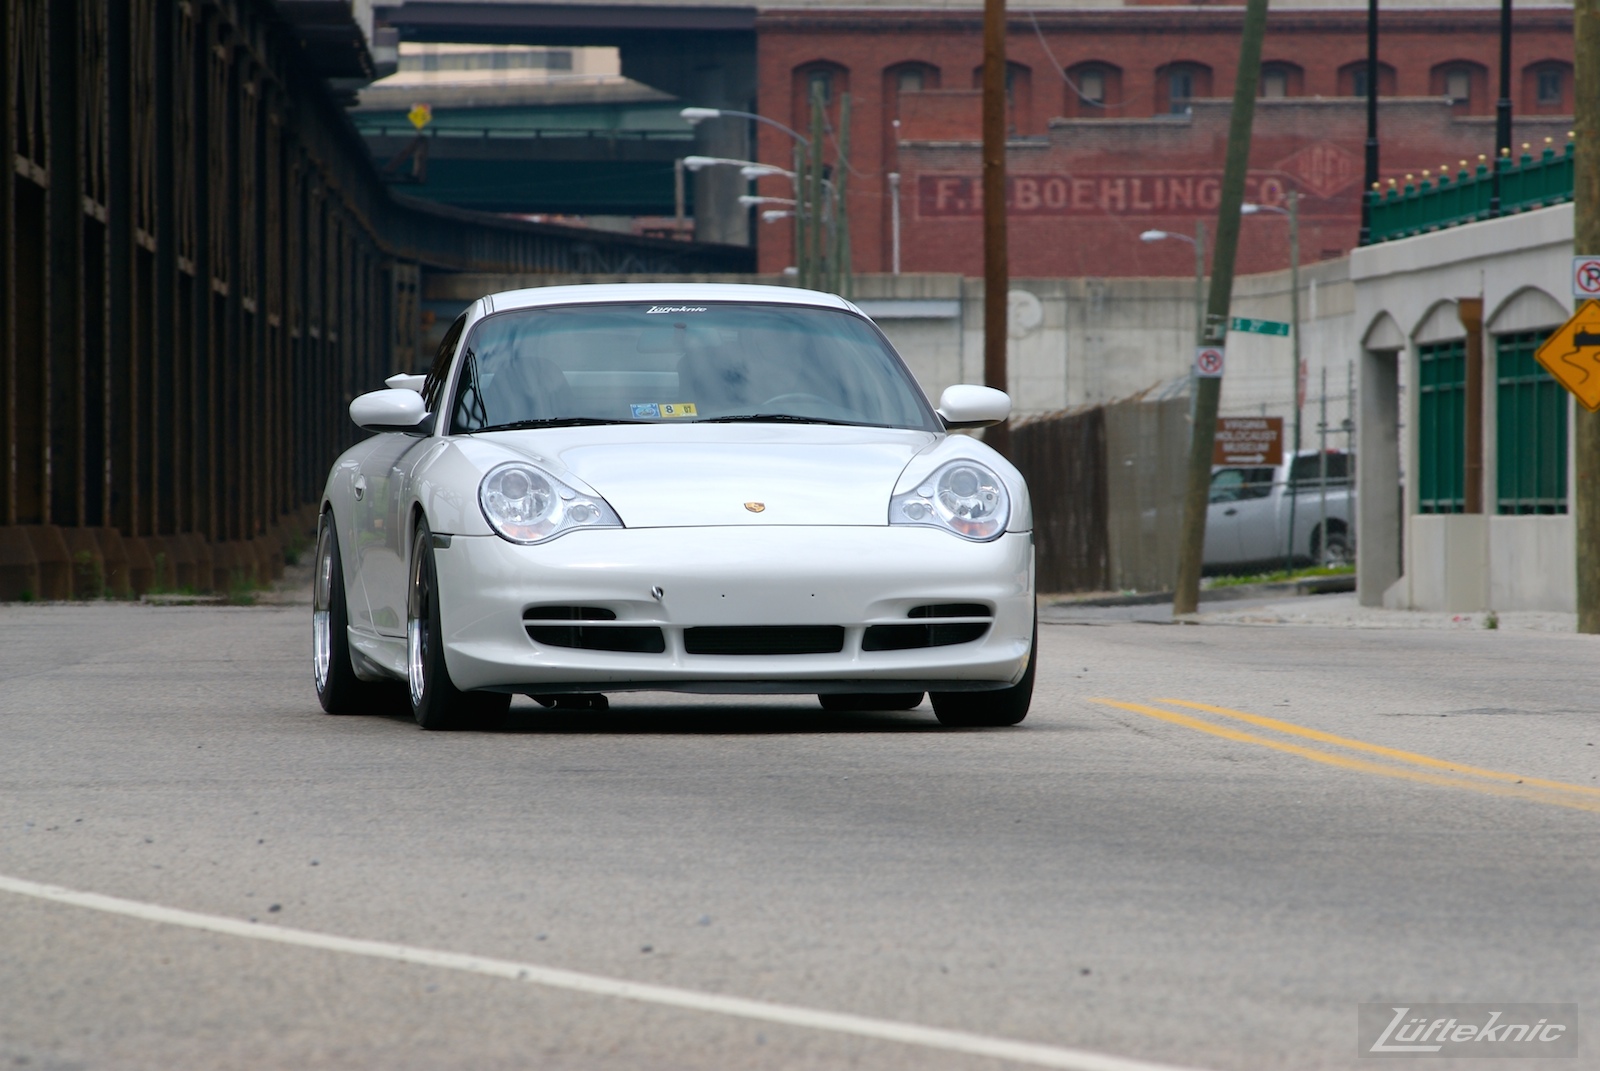 A track-prepped white Porsche 996 Gt3 with Fikse wheels.